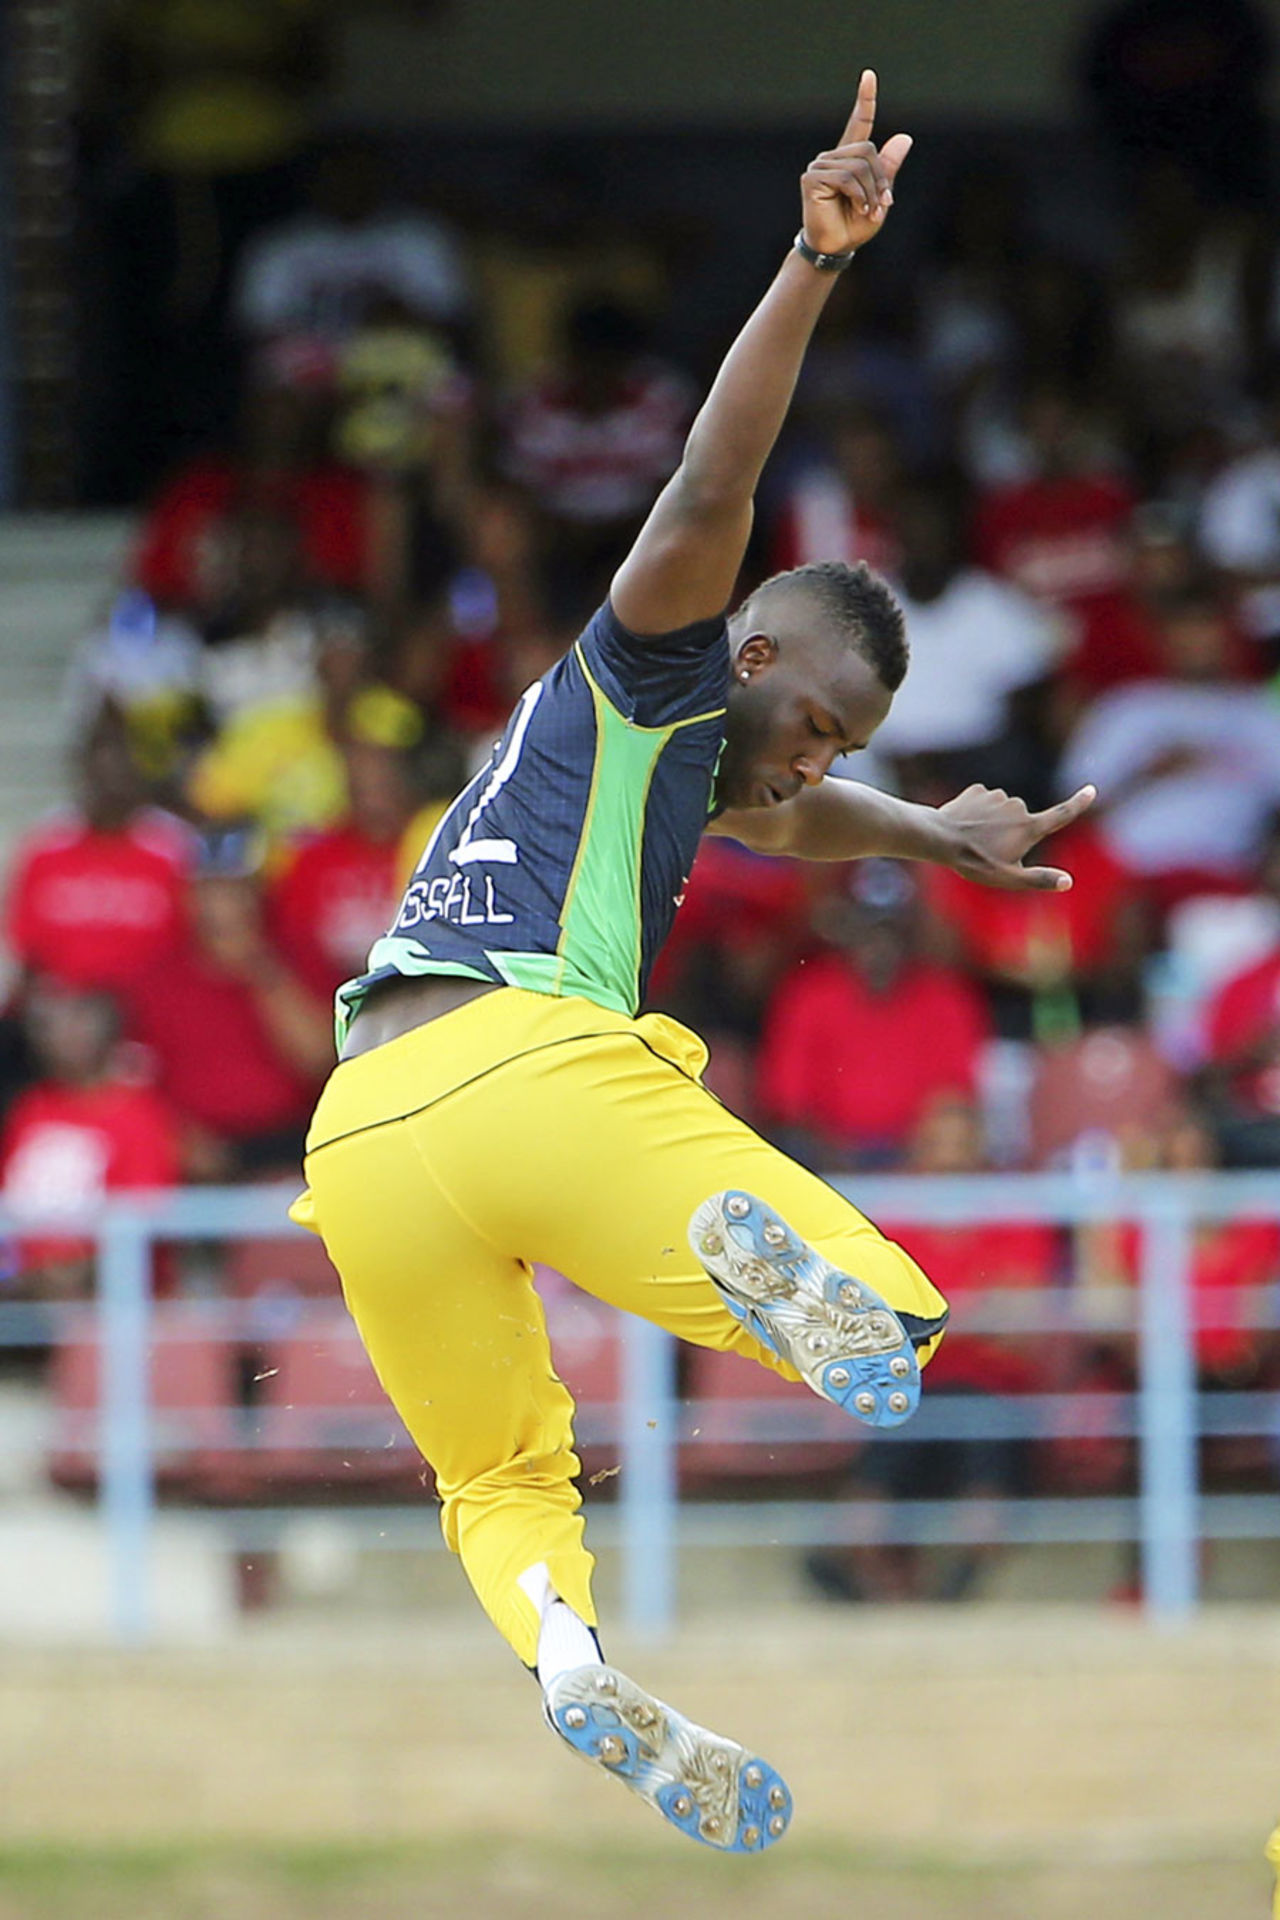 Andre Russell leaps after taking a wicket, Trinidad & Tobago Red Steel v Jamaica Tallawahs, CPL 2014, Port of Spain, July 26, 2014